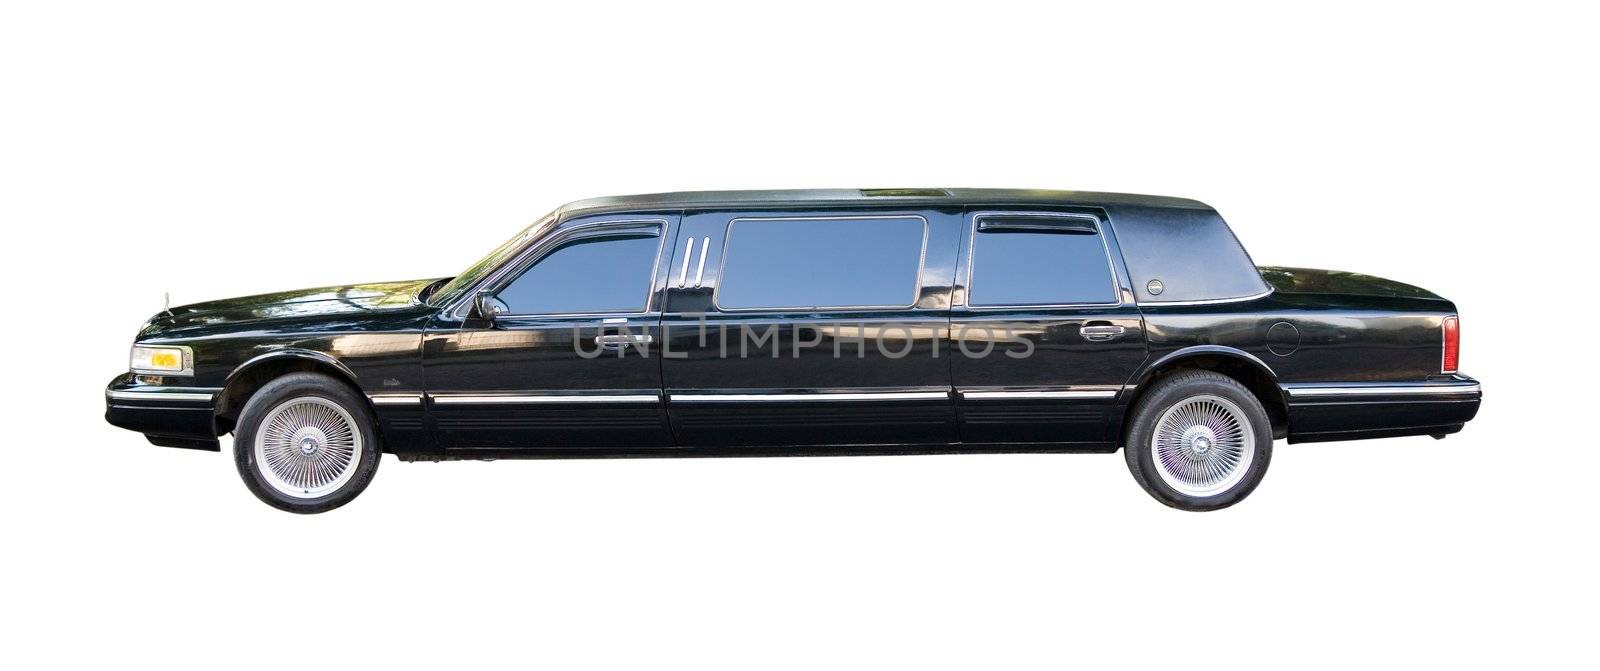 an old american limousine using for weddinds - isolated with clipping paths